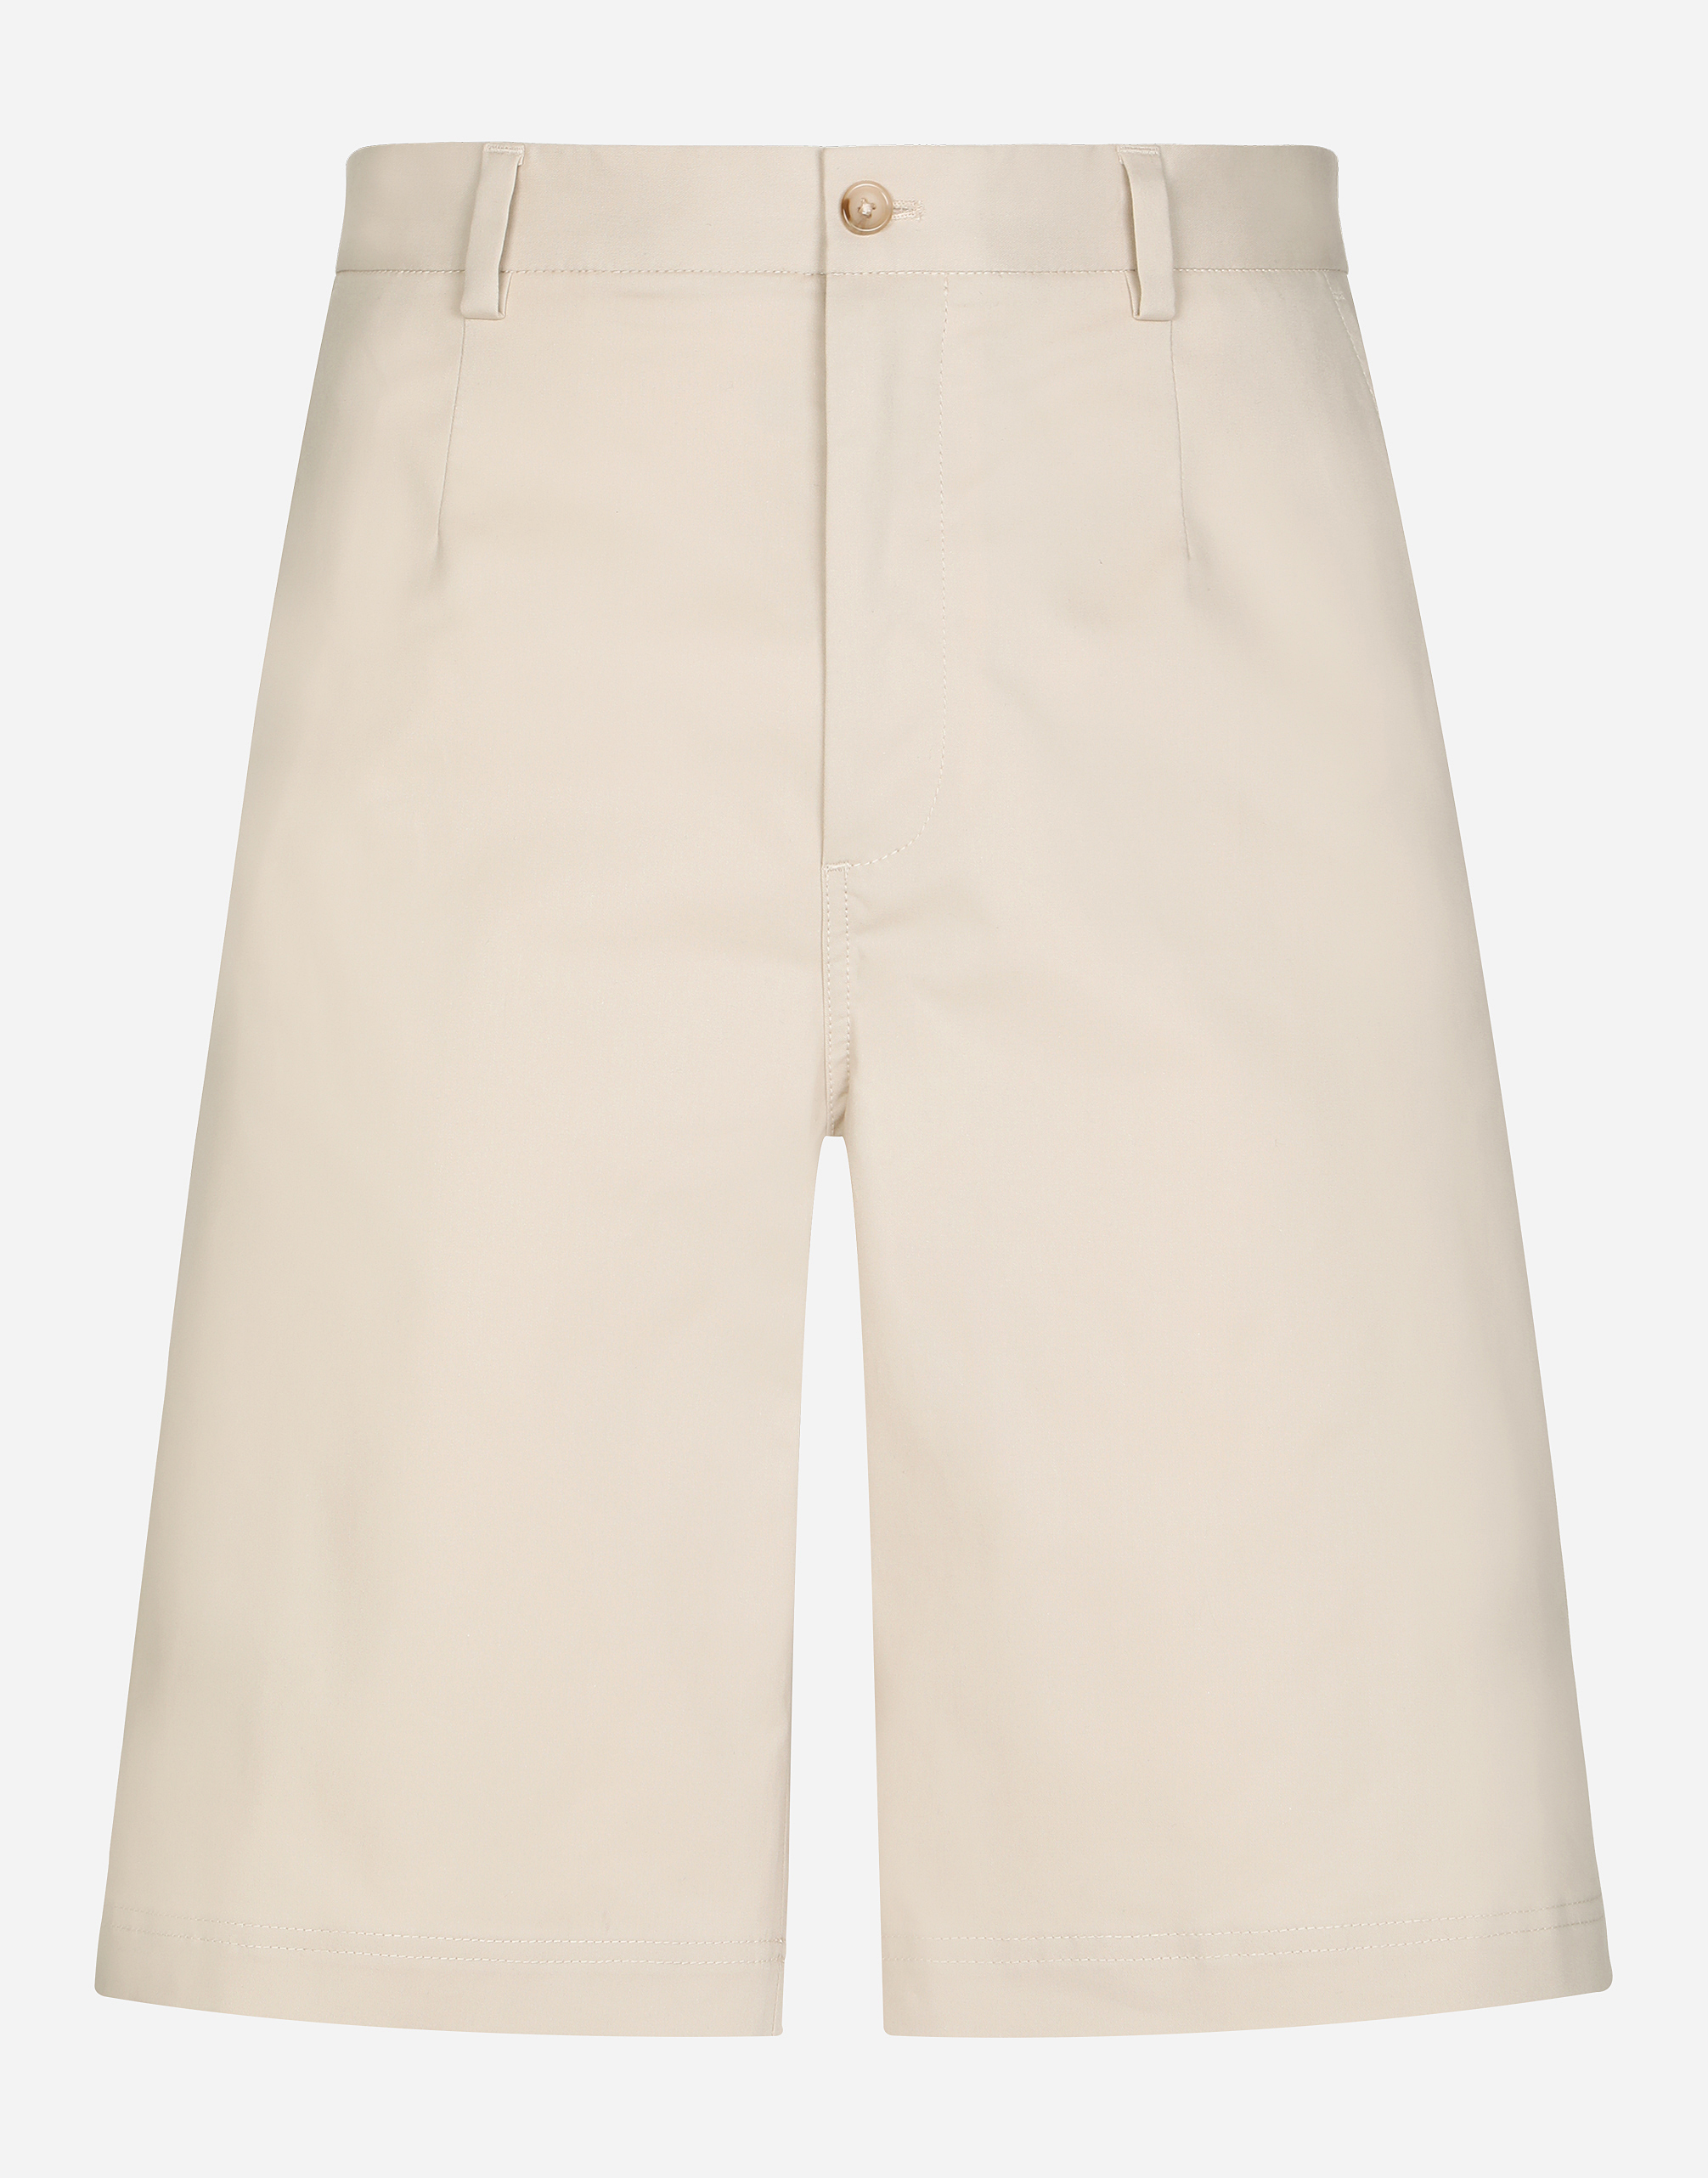 Dolce & Gabbana Stretch Cotton Shorts With Branded Tag In Beige